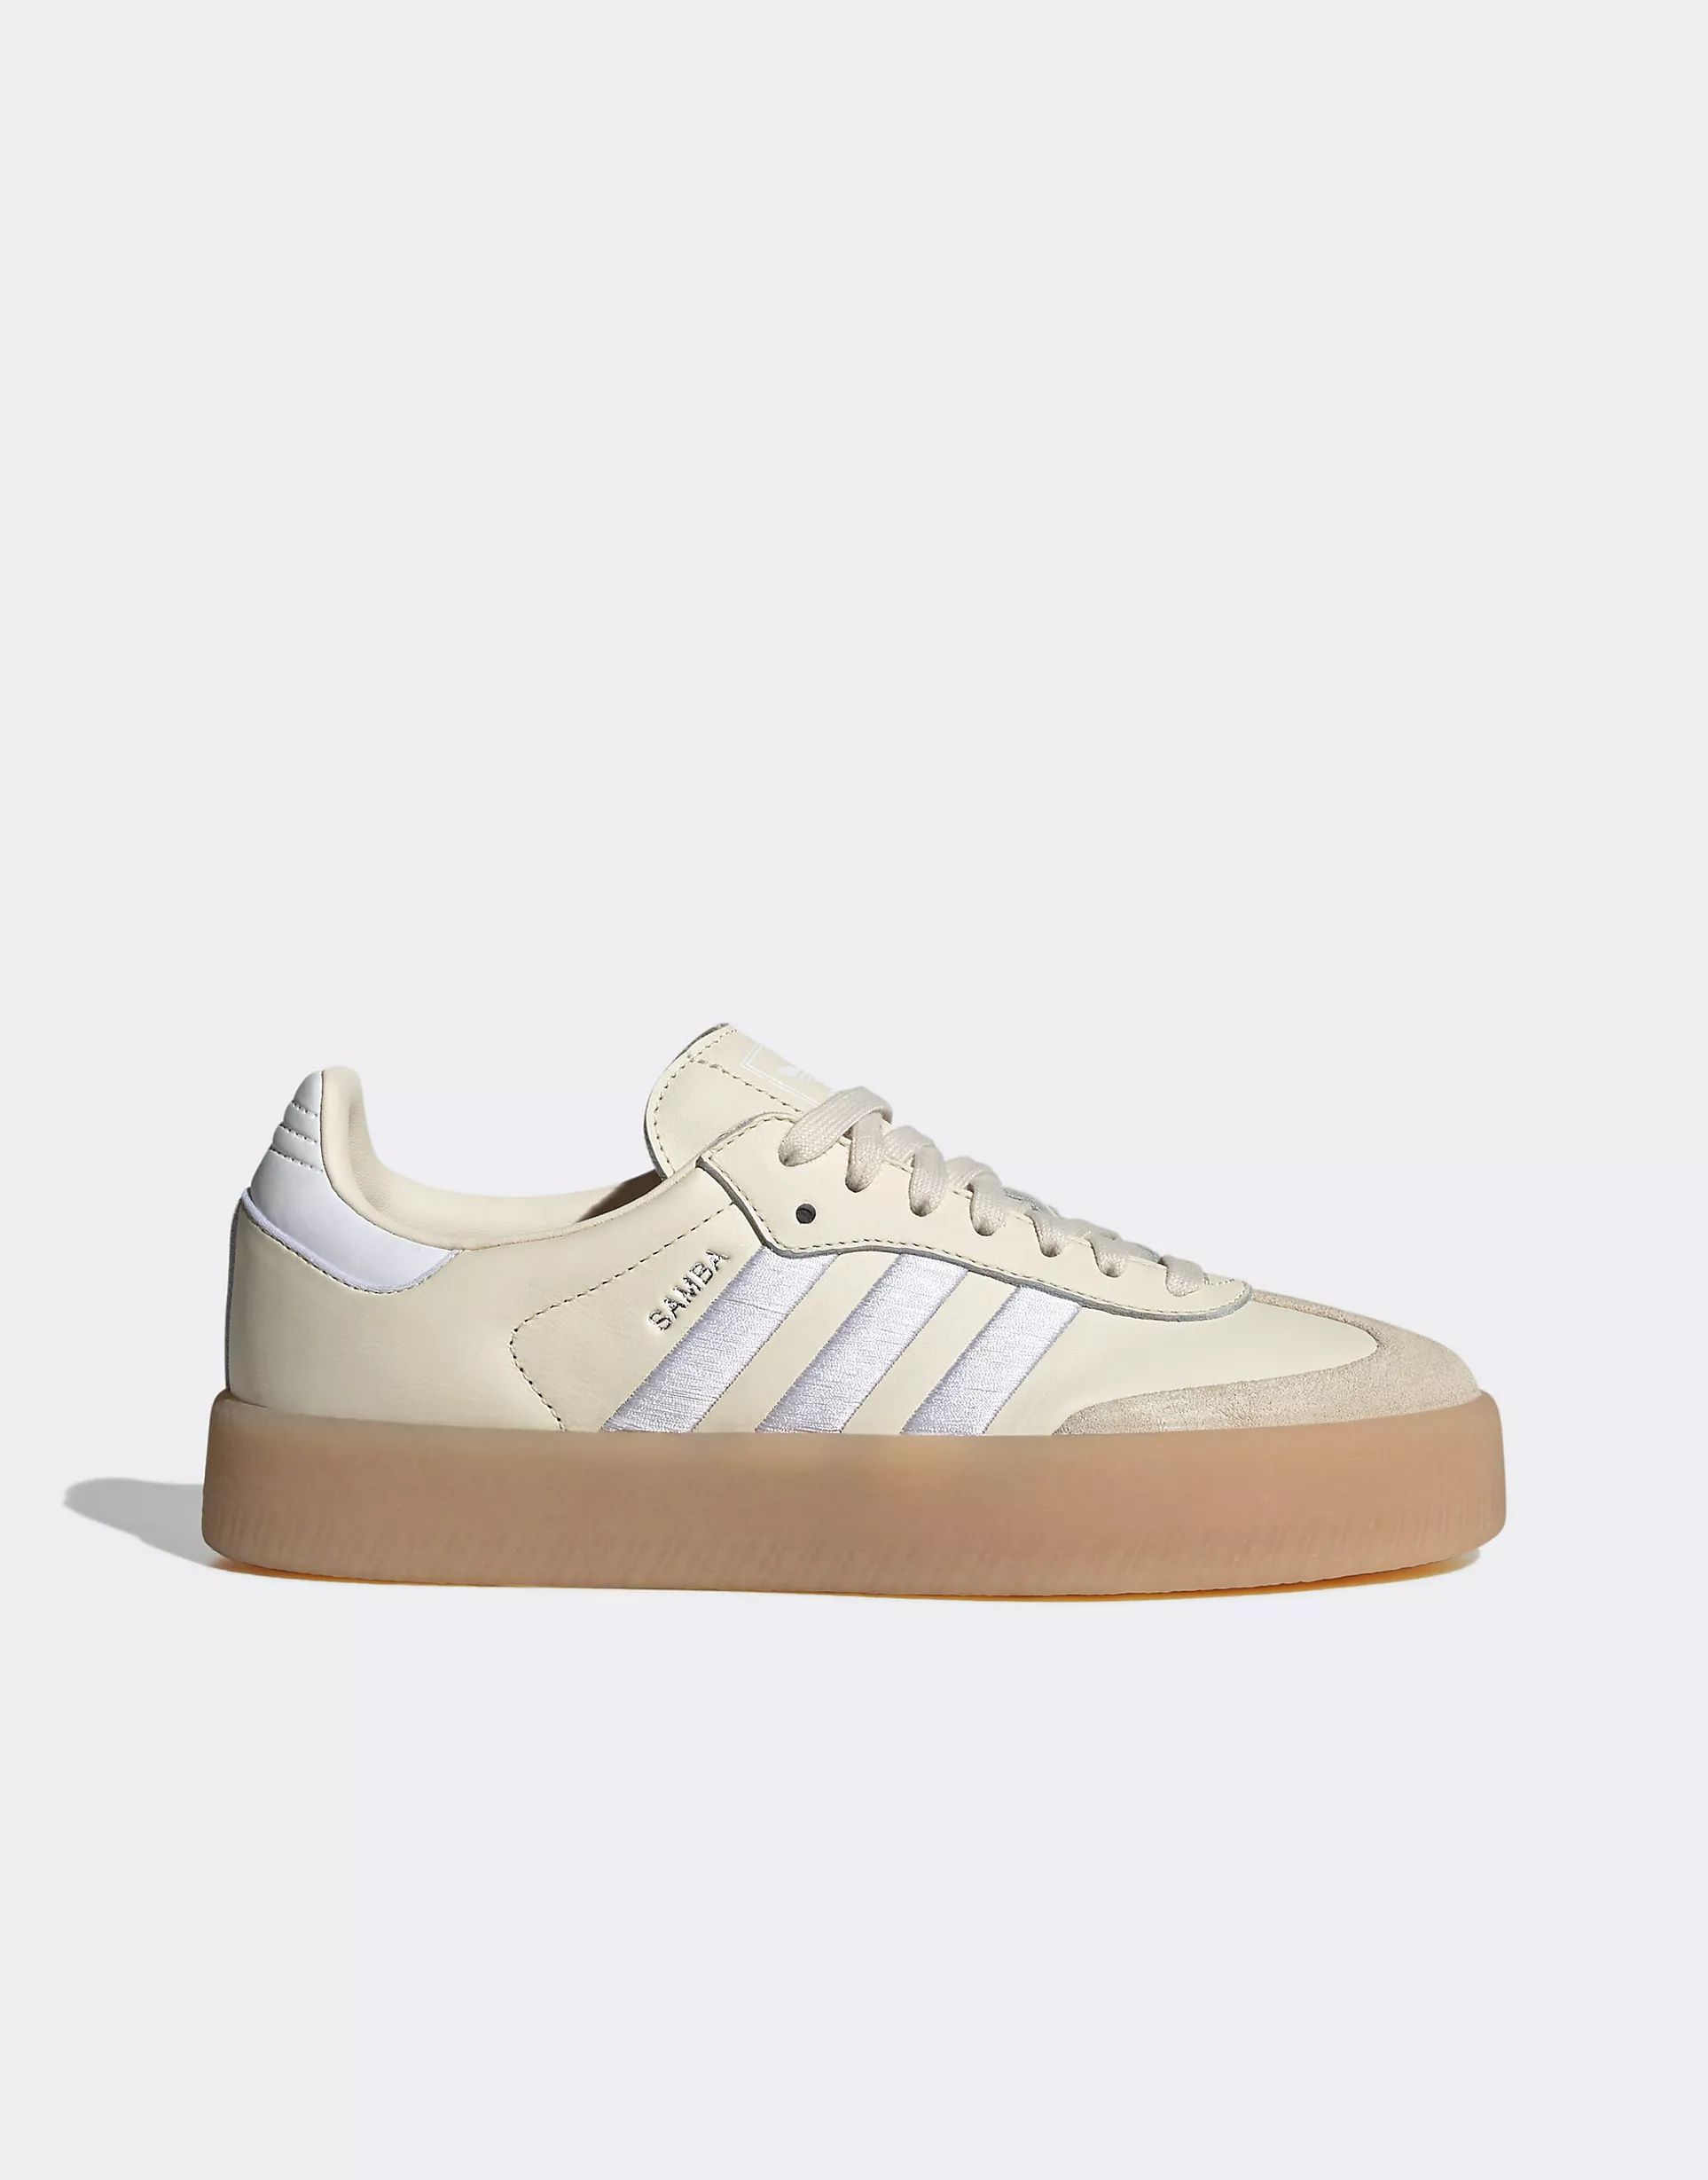 adidas Originals Sambae sneakers in beige and white with rubber sole | ASOS | ASOS (Global)